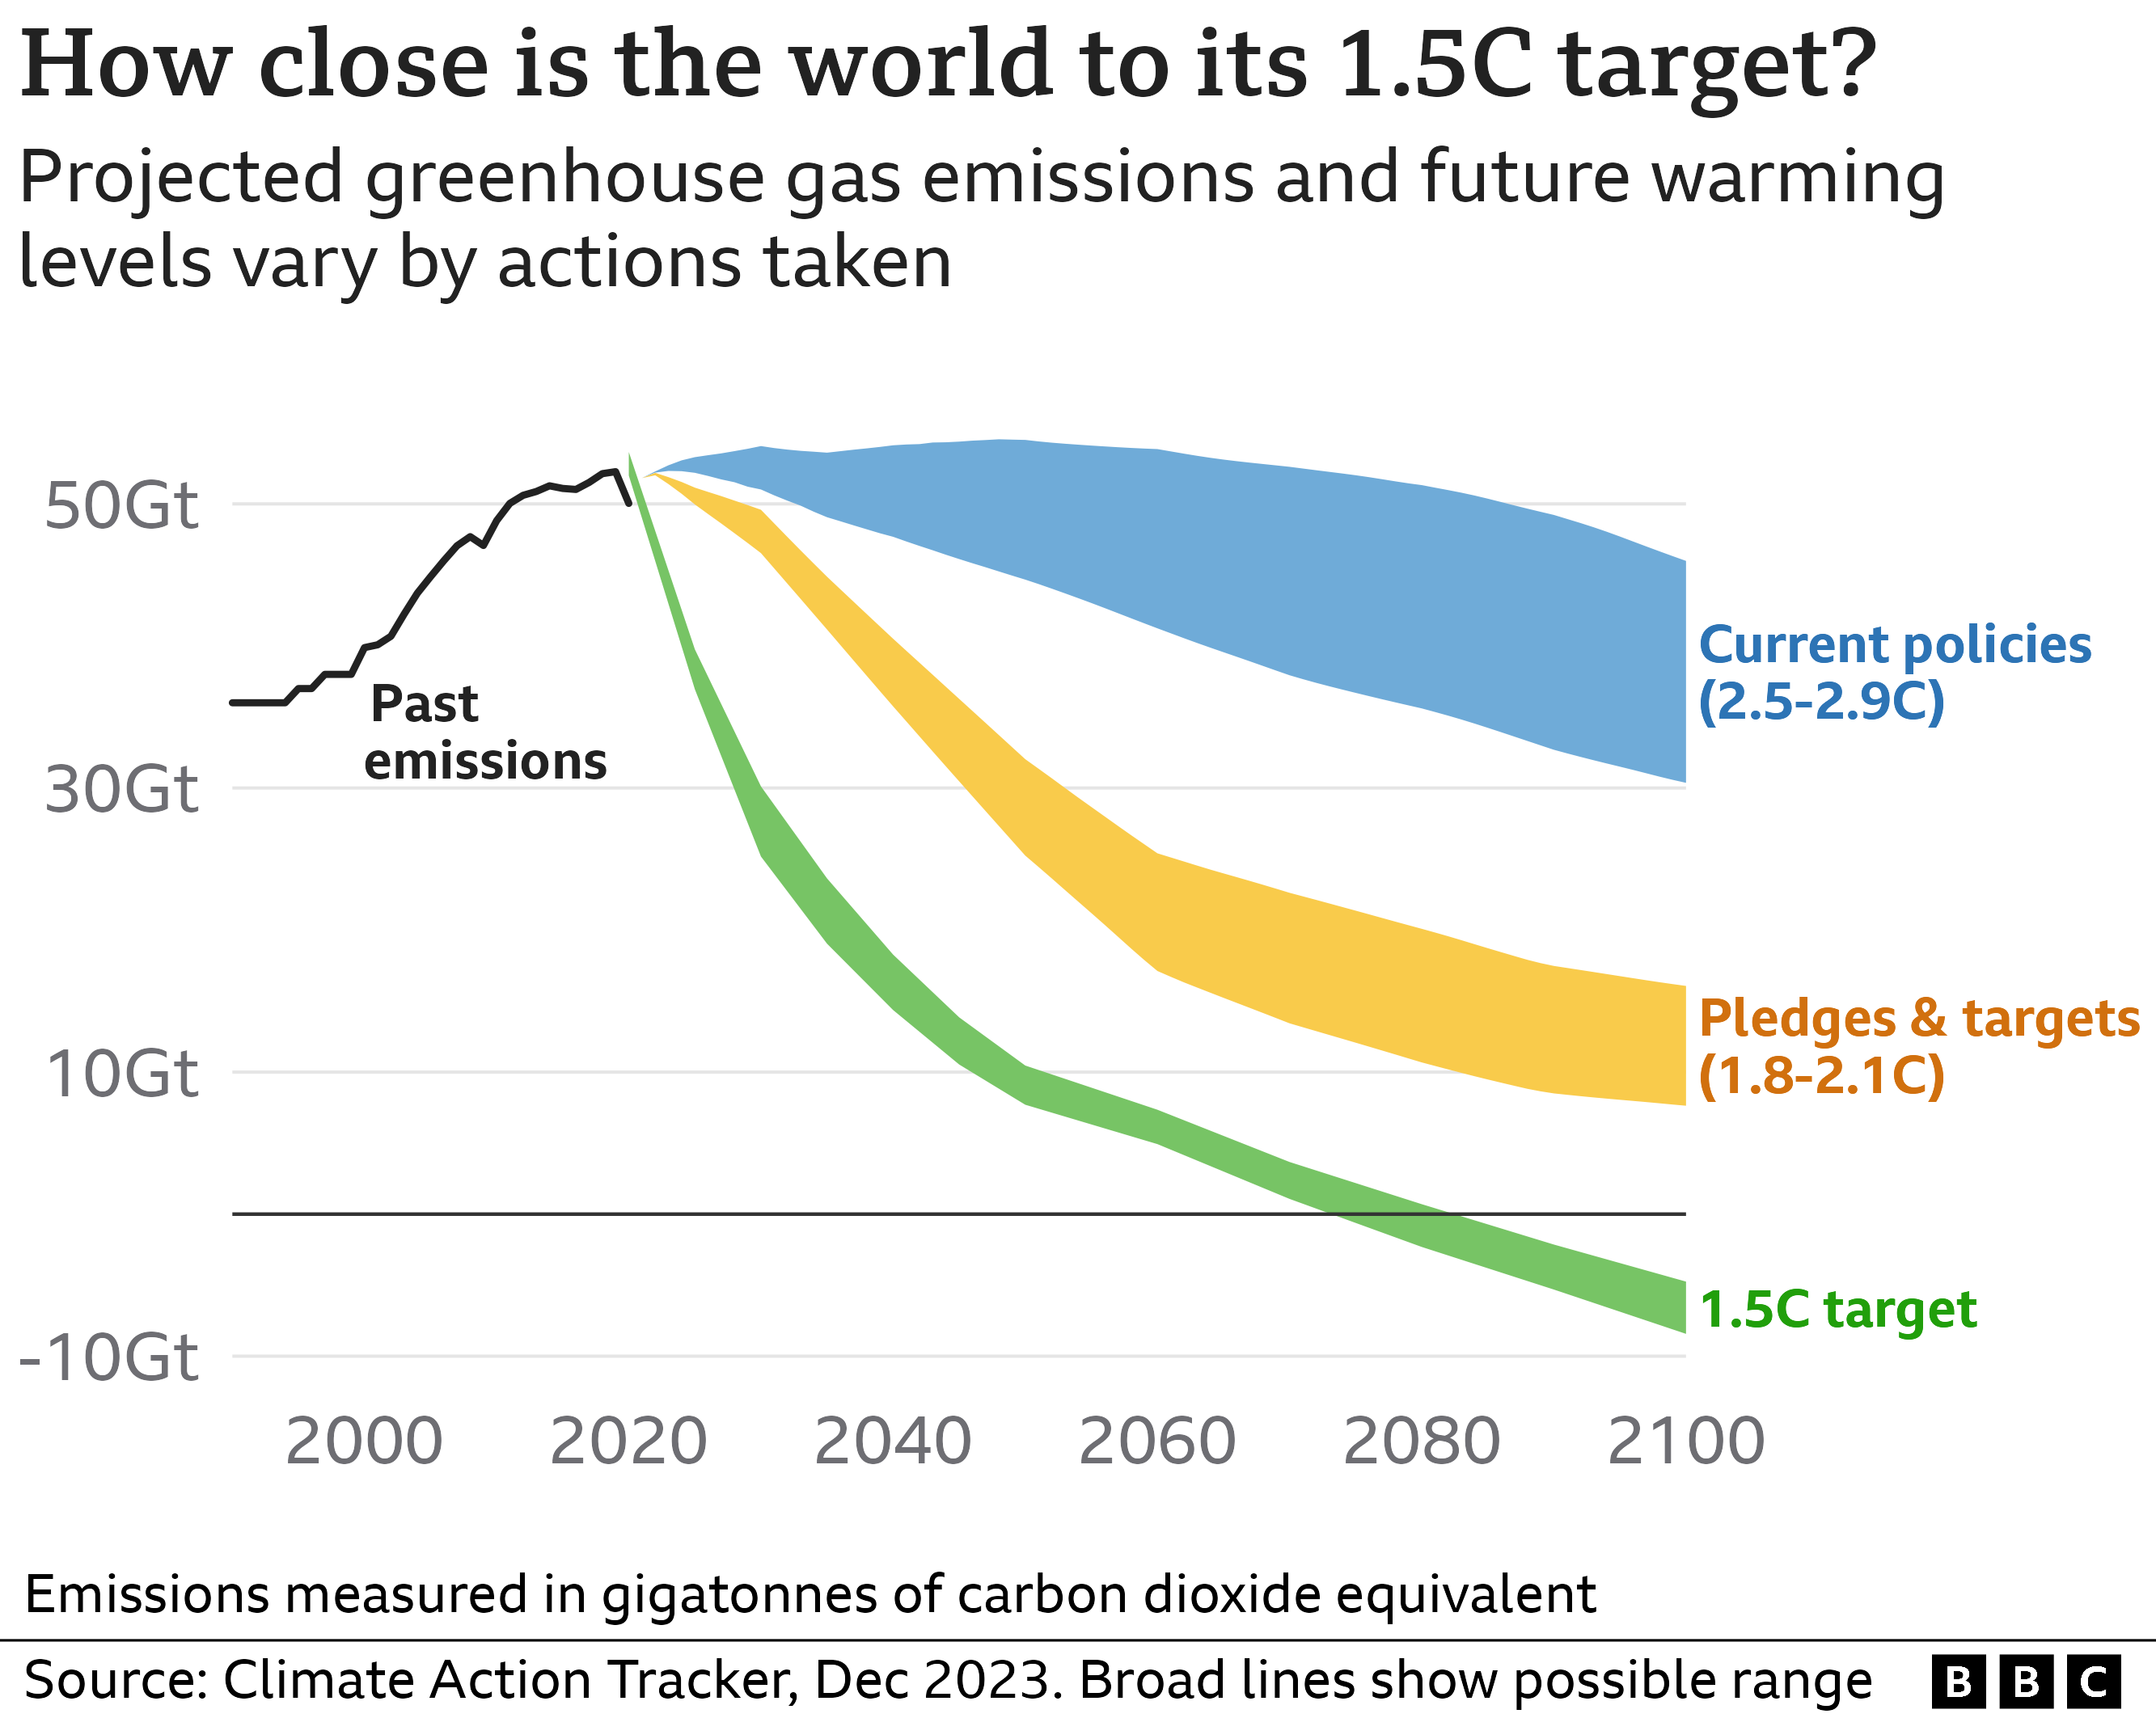 Line chart showing three different projected pathways for global emissions and their respective levels of warming by the year 2100. If current policies are pursued, the world could still see 2.6-2.9 degrees warming; if all pledges and targets are met, 2.0 degrees of warming. But in order to reach the target of 1.5C or less, global annual emissions need to sharply decrease beyond either set of actions.